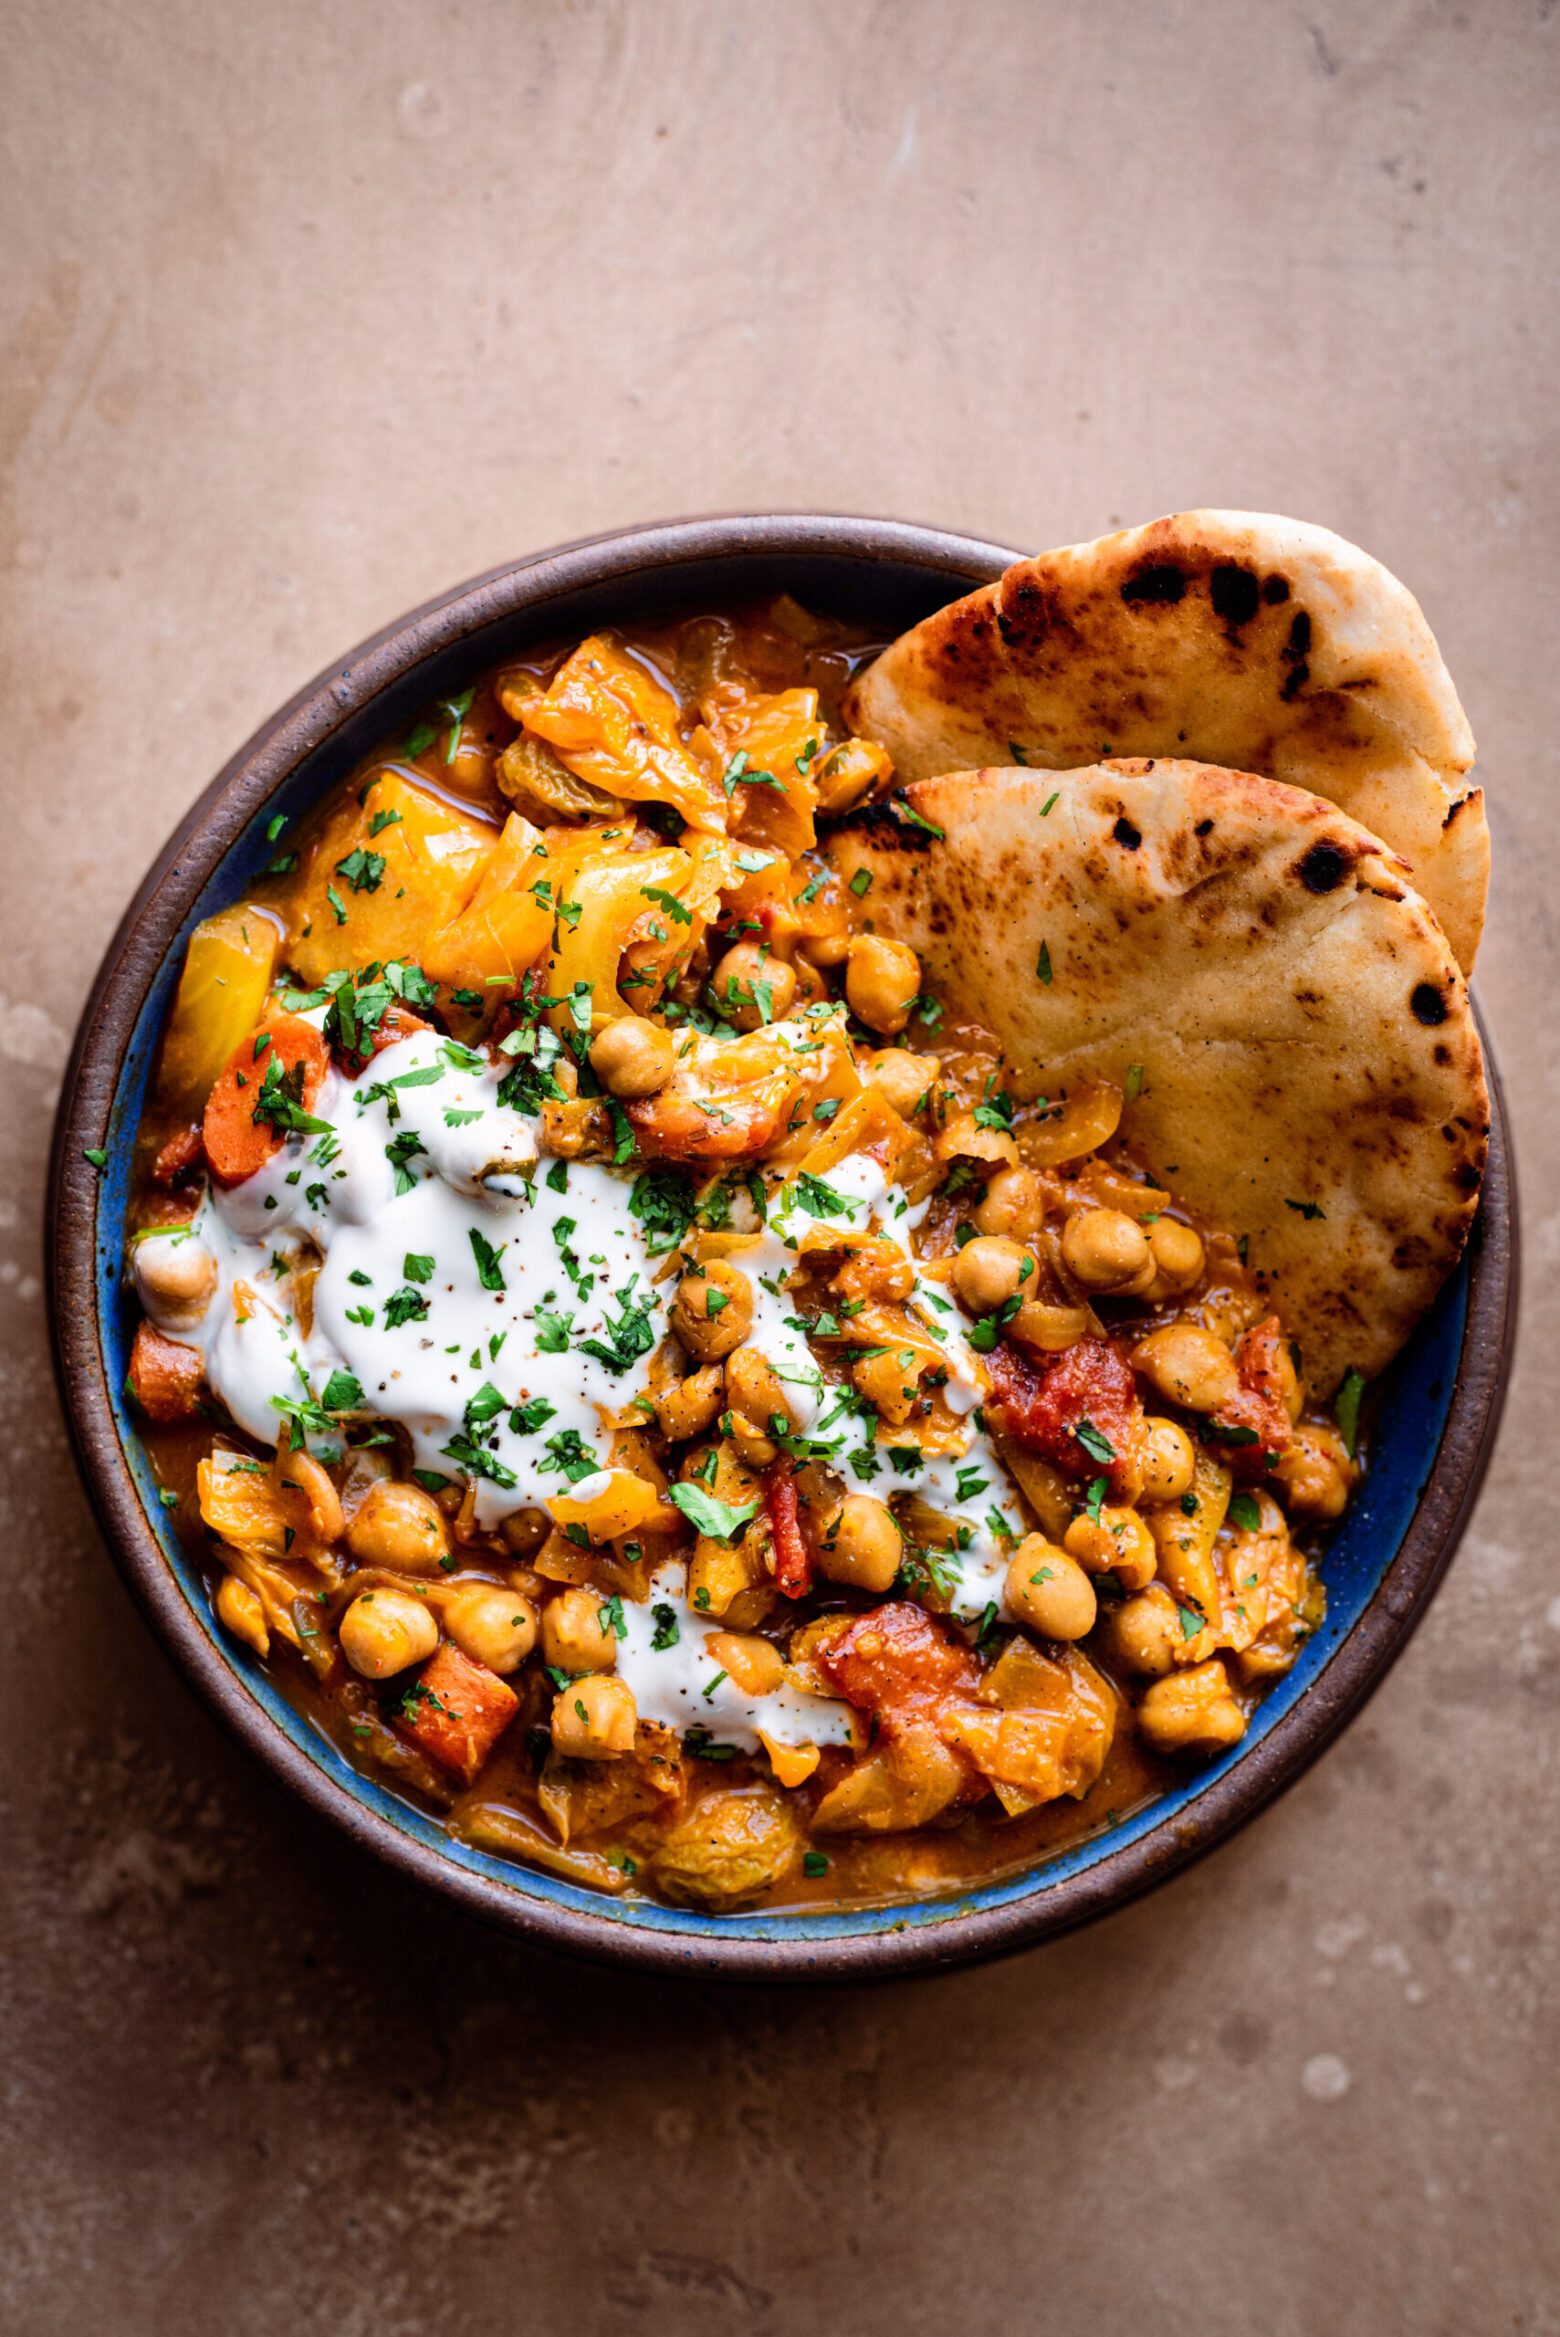 https://rainbowplantlife.com/wp-content/uploads/2021/03/braised-chickpea-stew-uncropped-1-of-1-scaled.jpg